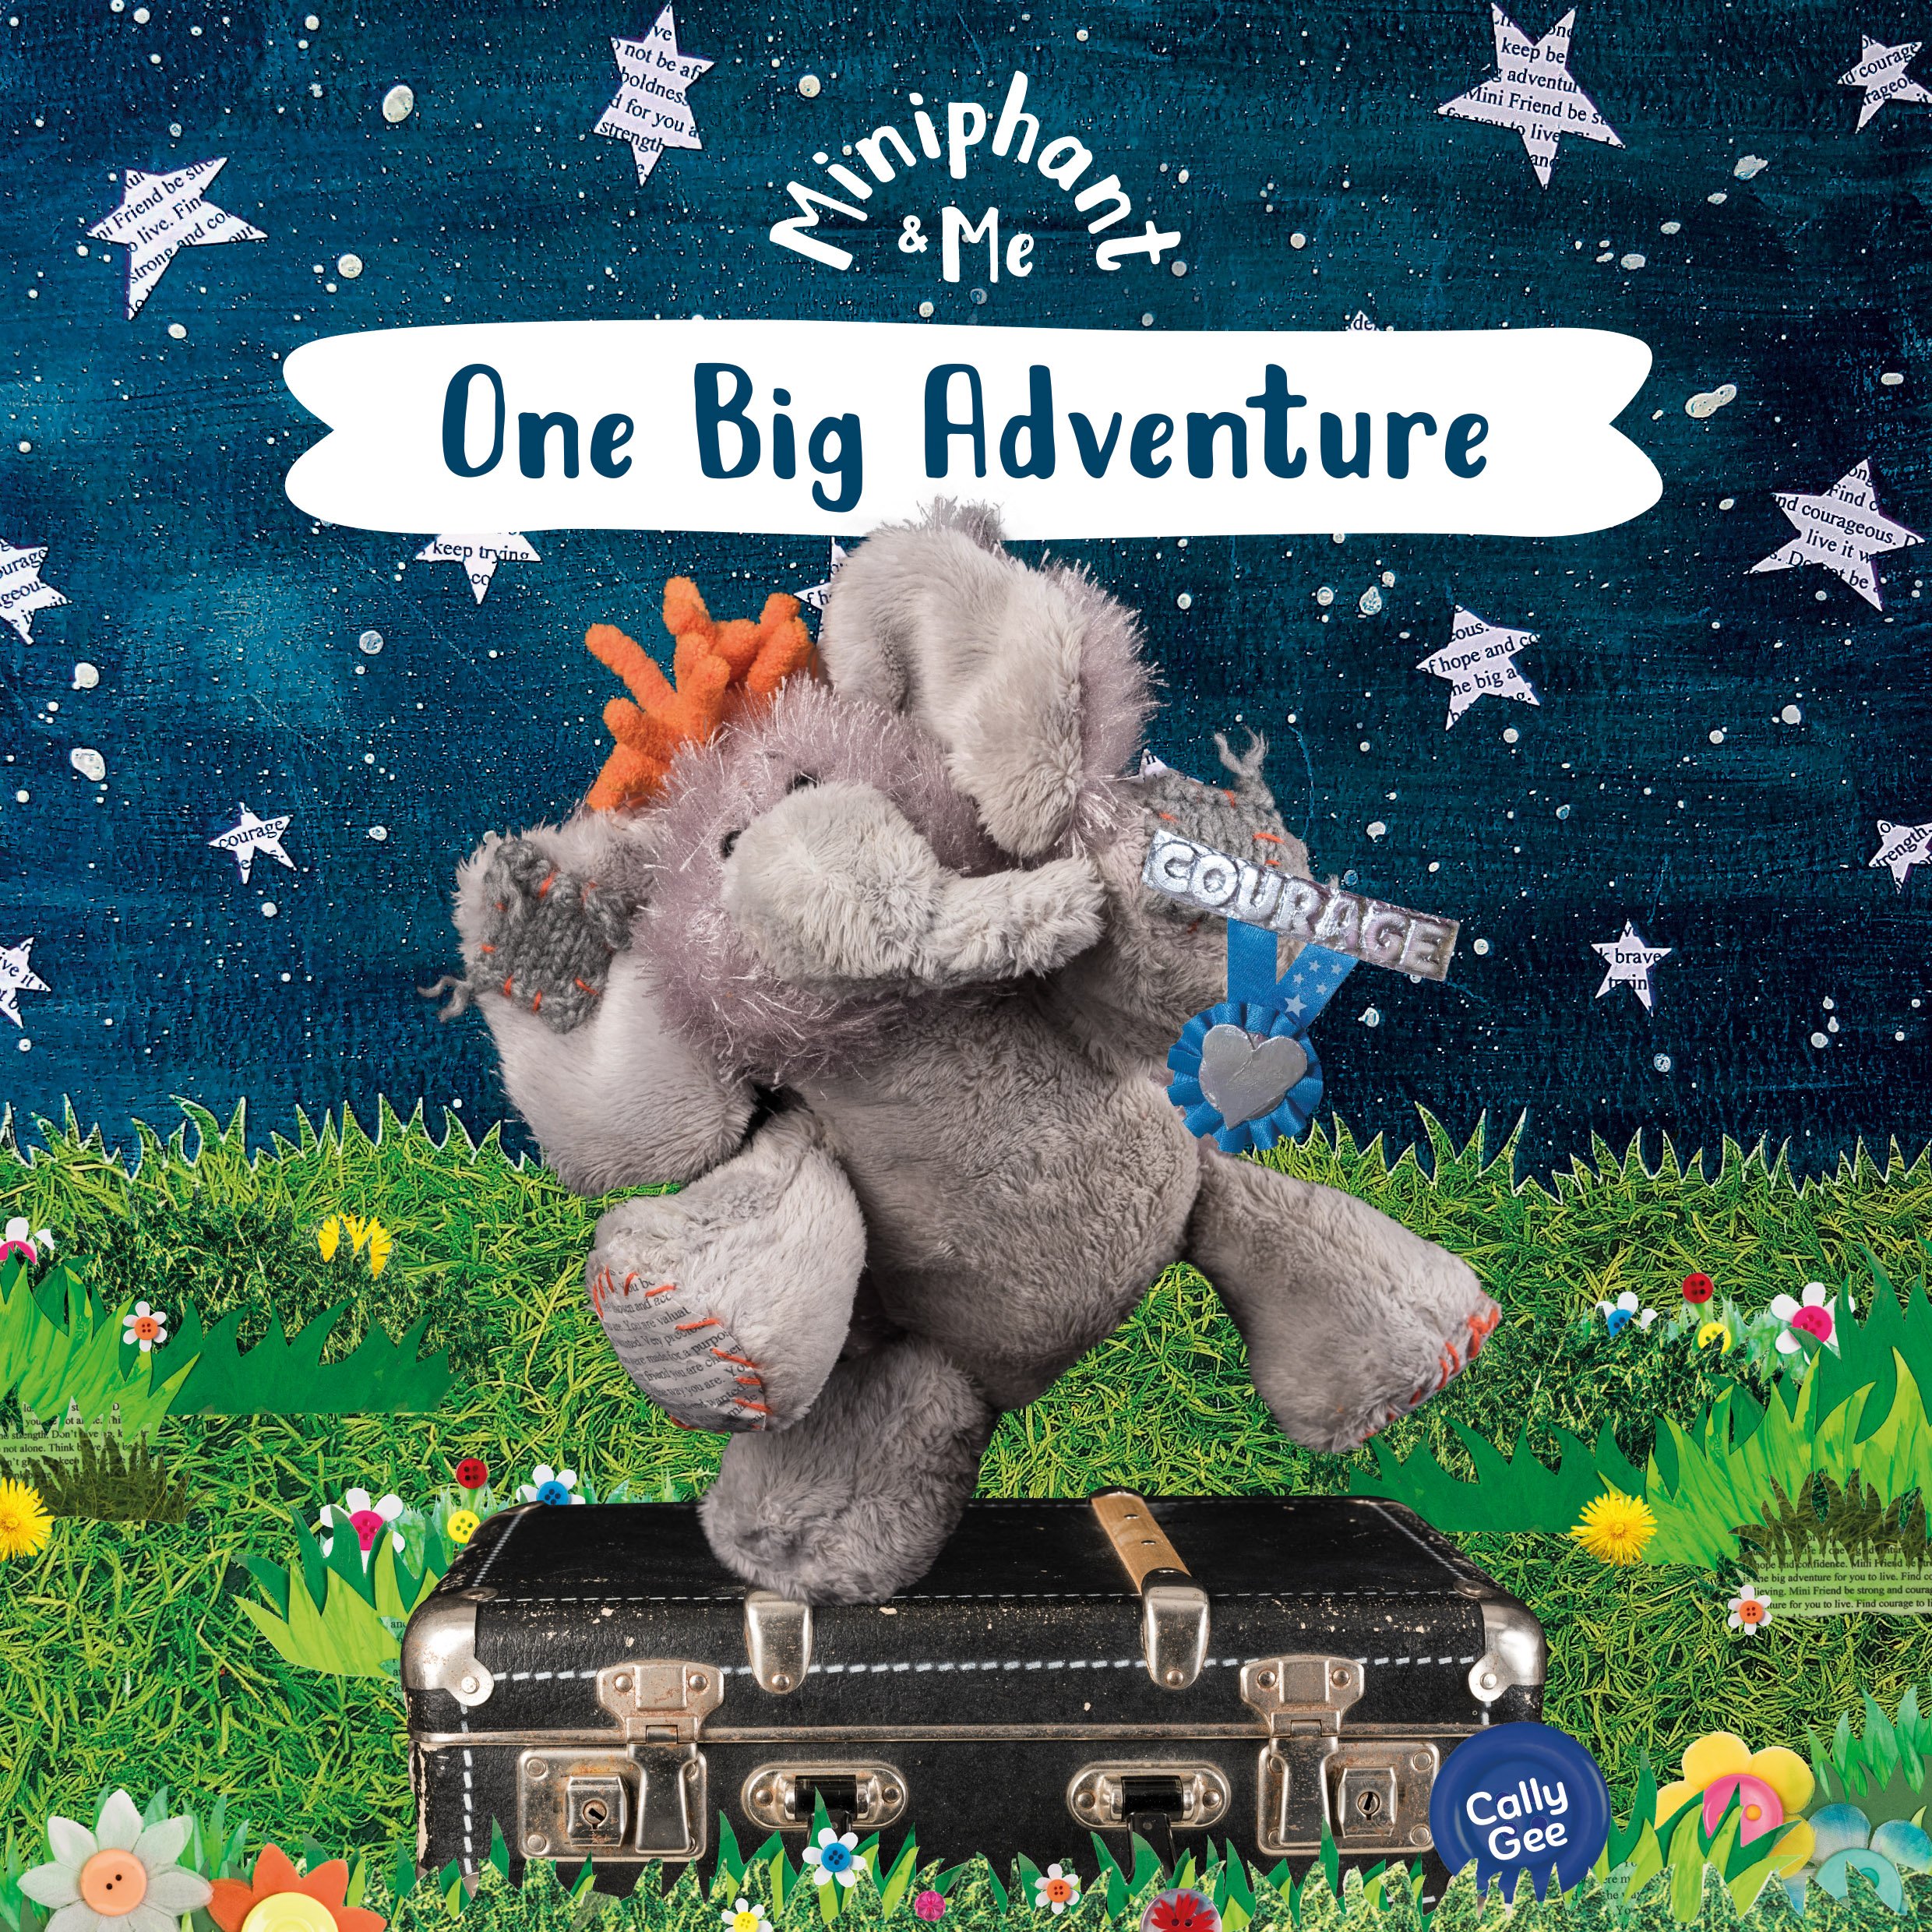 More information on Miniphant & Me One Big Adventure